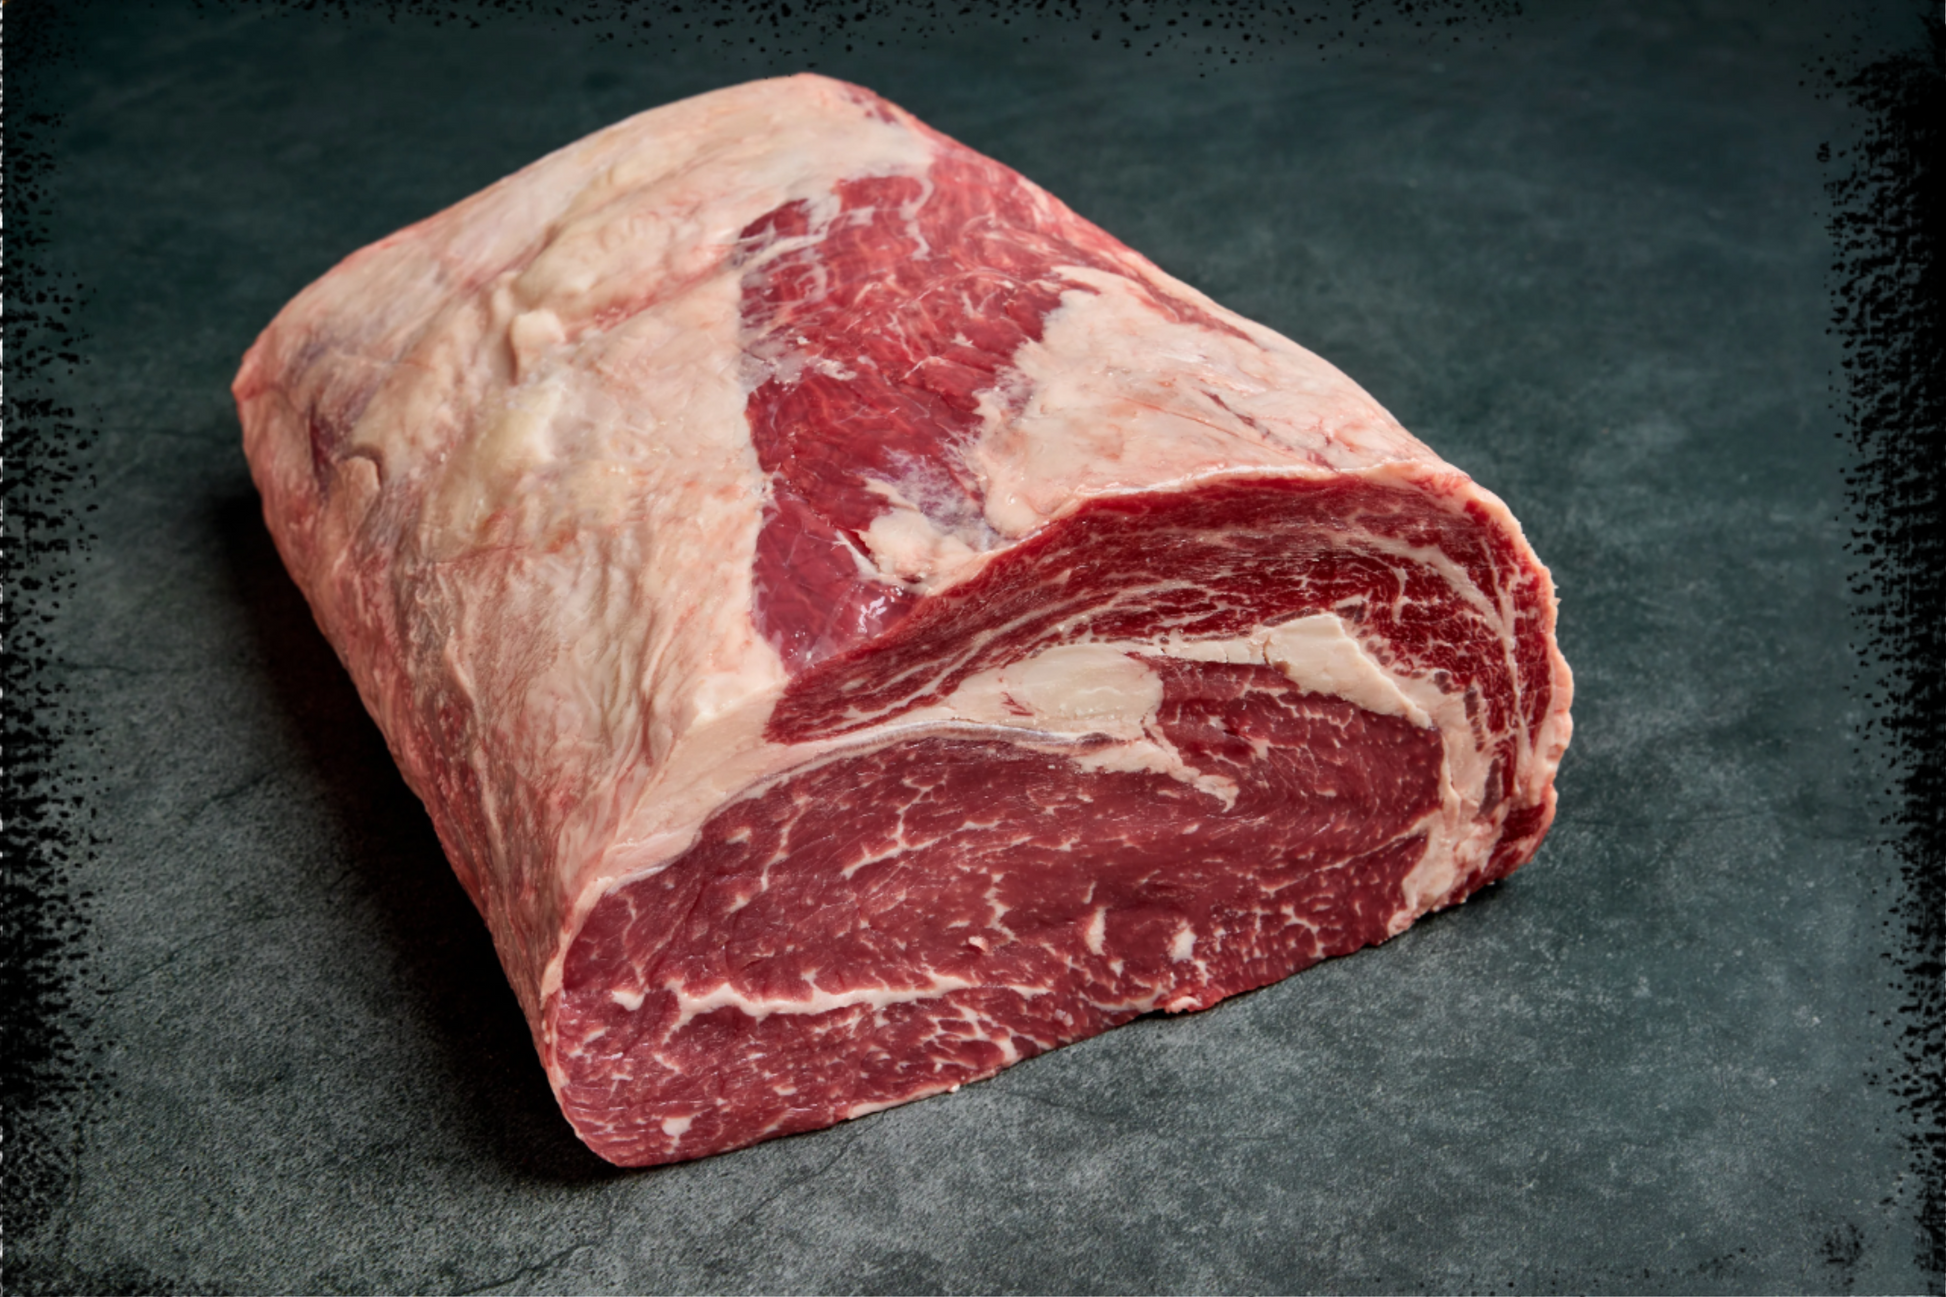 Grass-Fed Beef Ribeye, Brazil (Dhs 41.90/kg) - Chilled